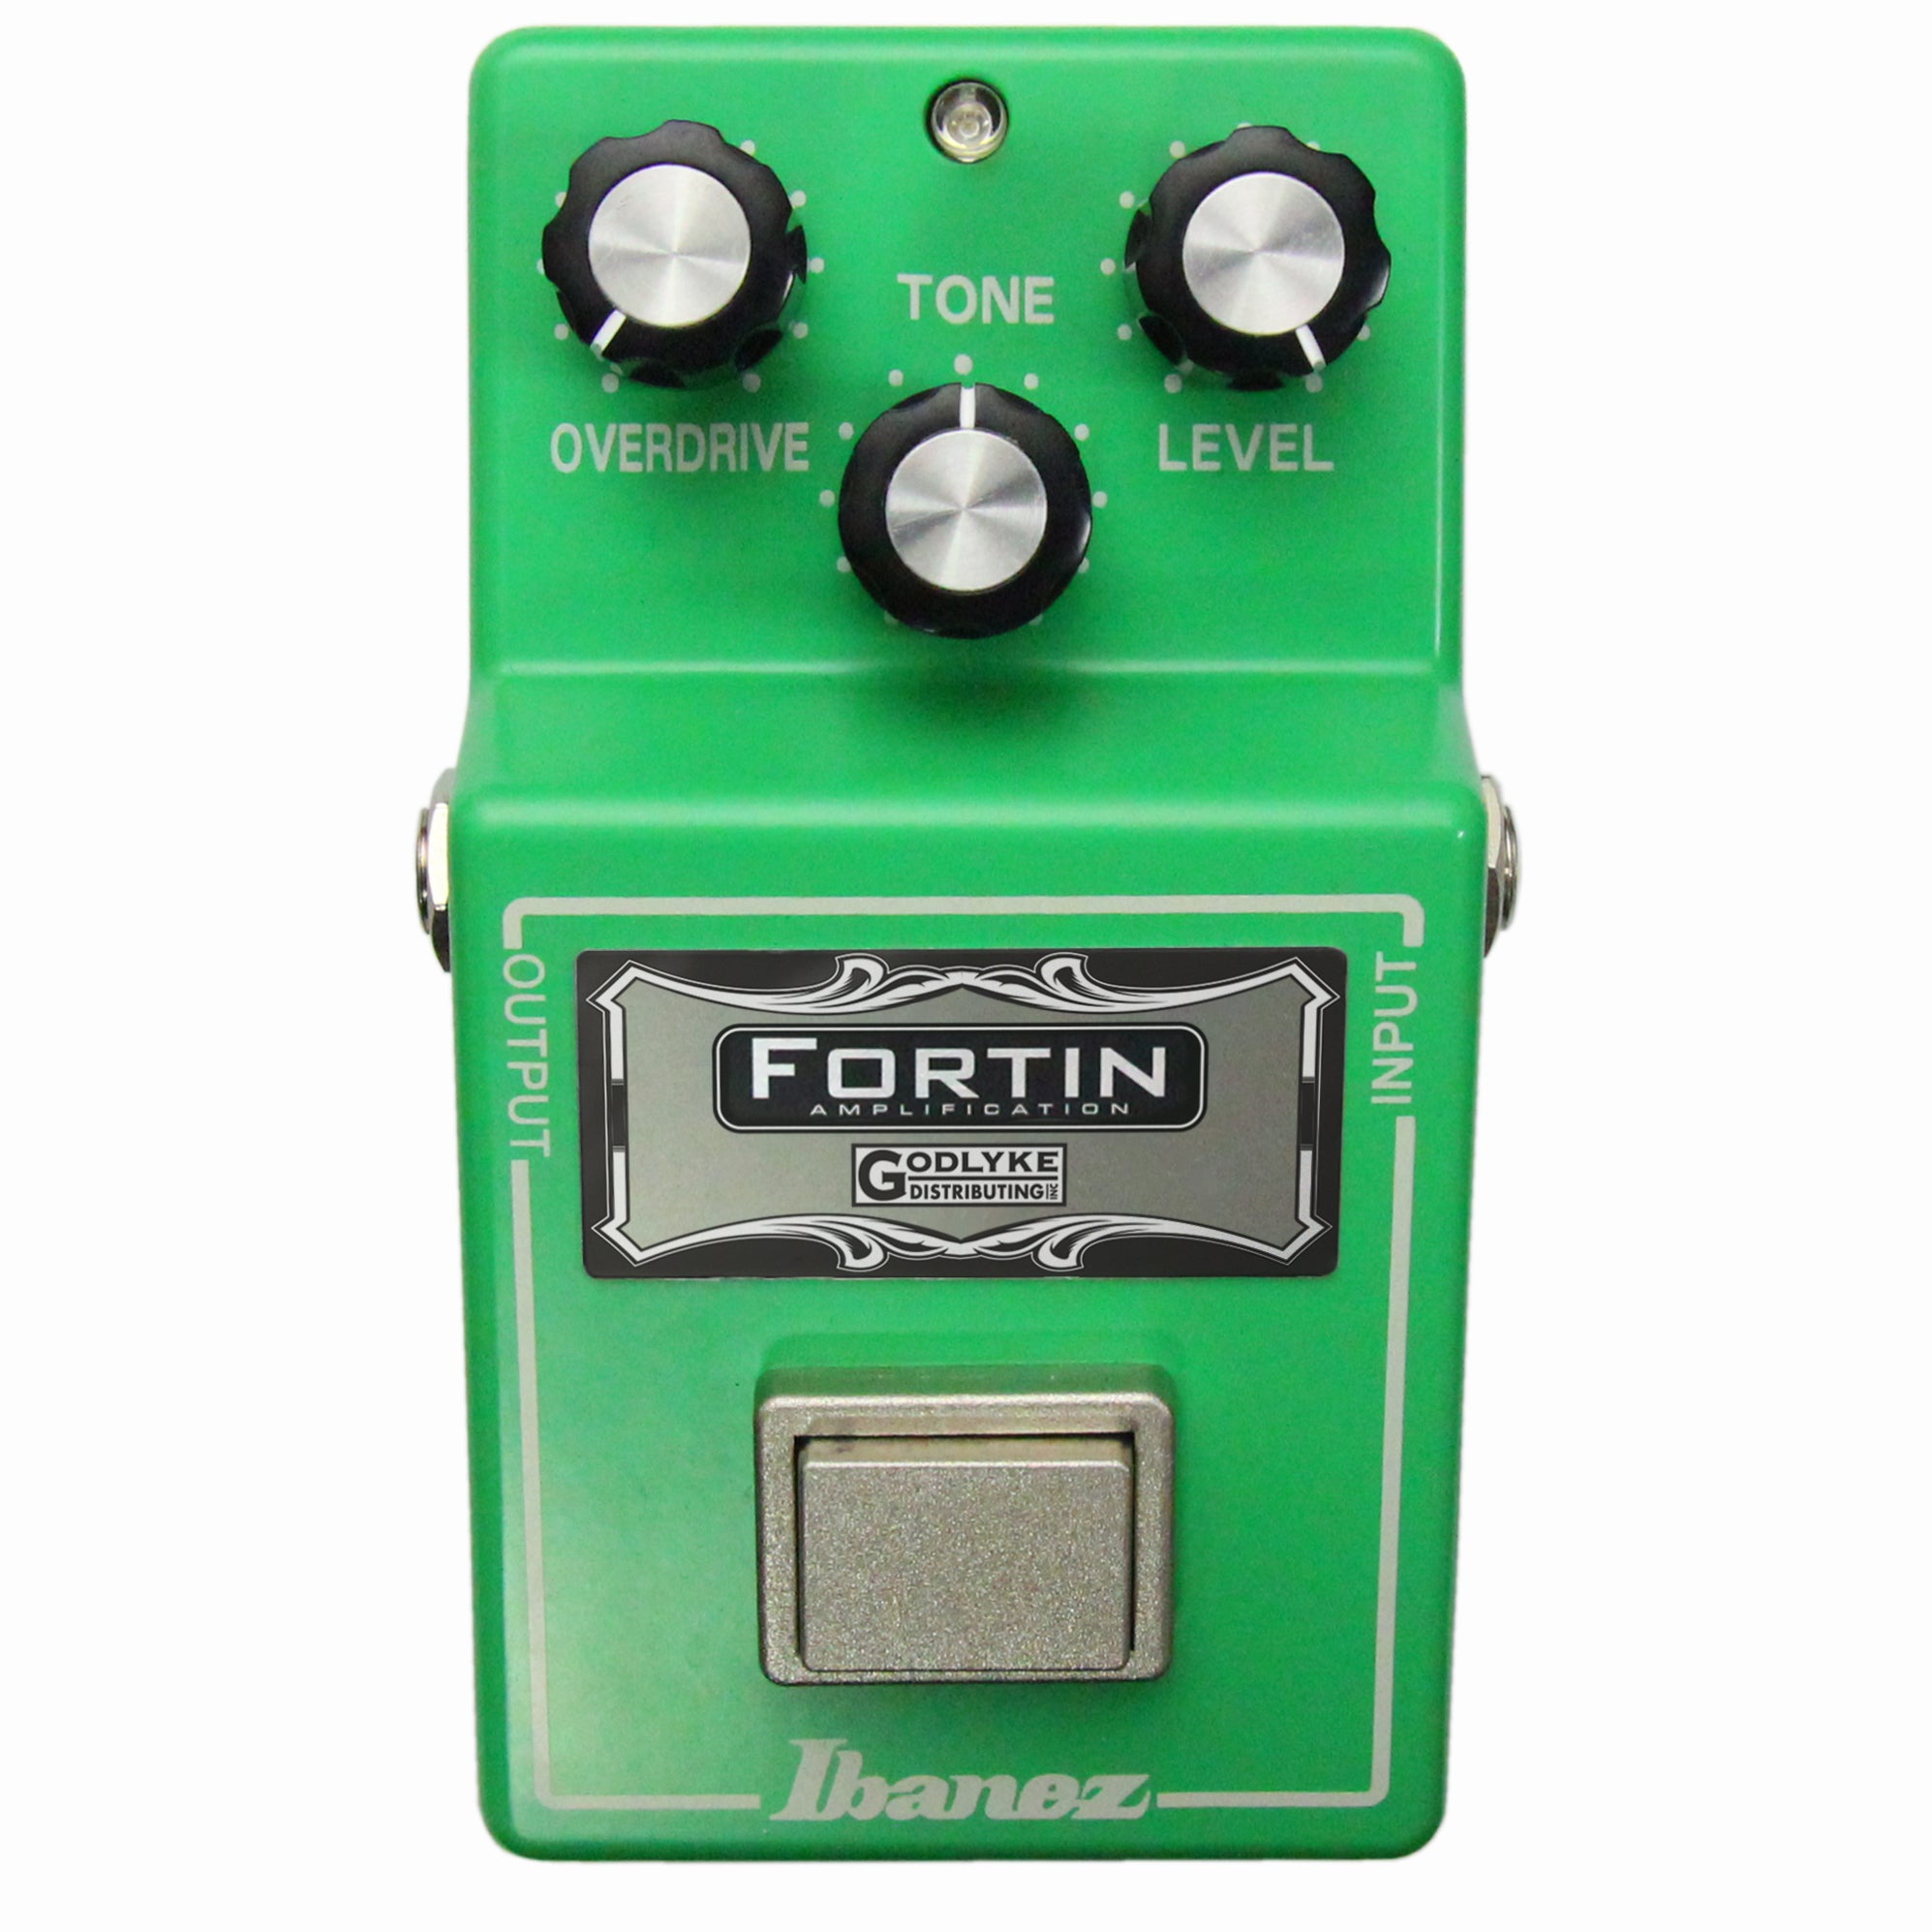 Fortin-Modded Ibanez TS808 Overdrive